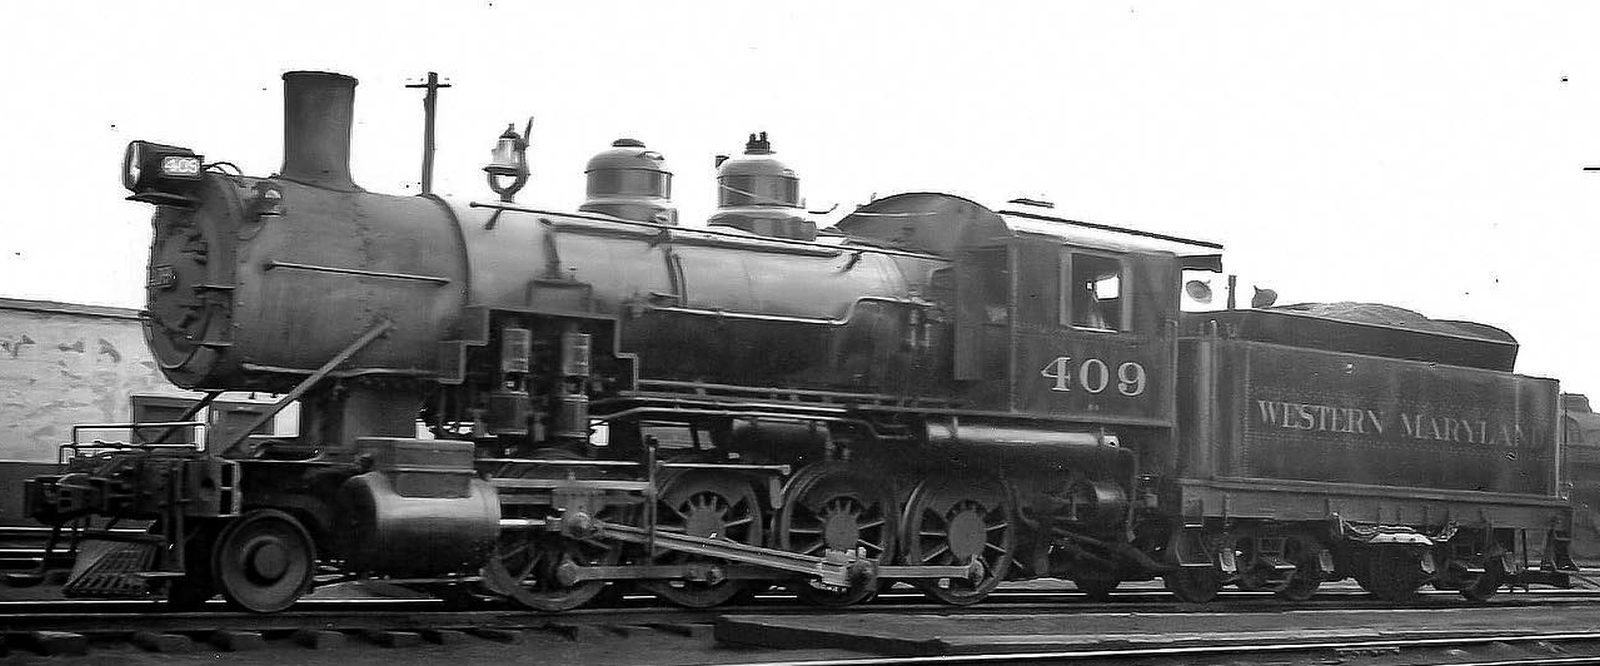 H-4a No. 409 in April 1939 in Hagerstown, Maryland